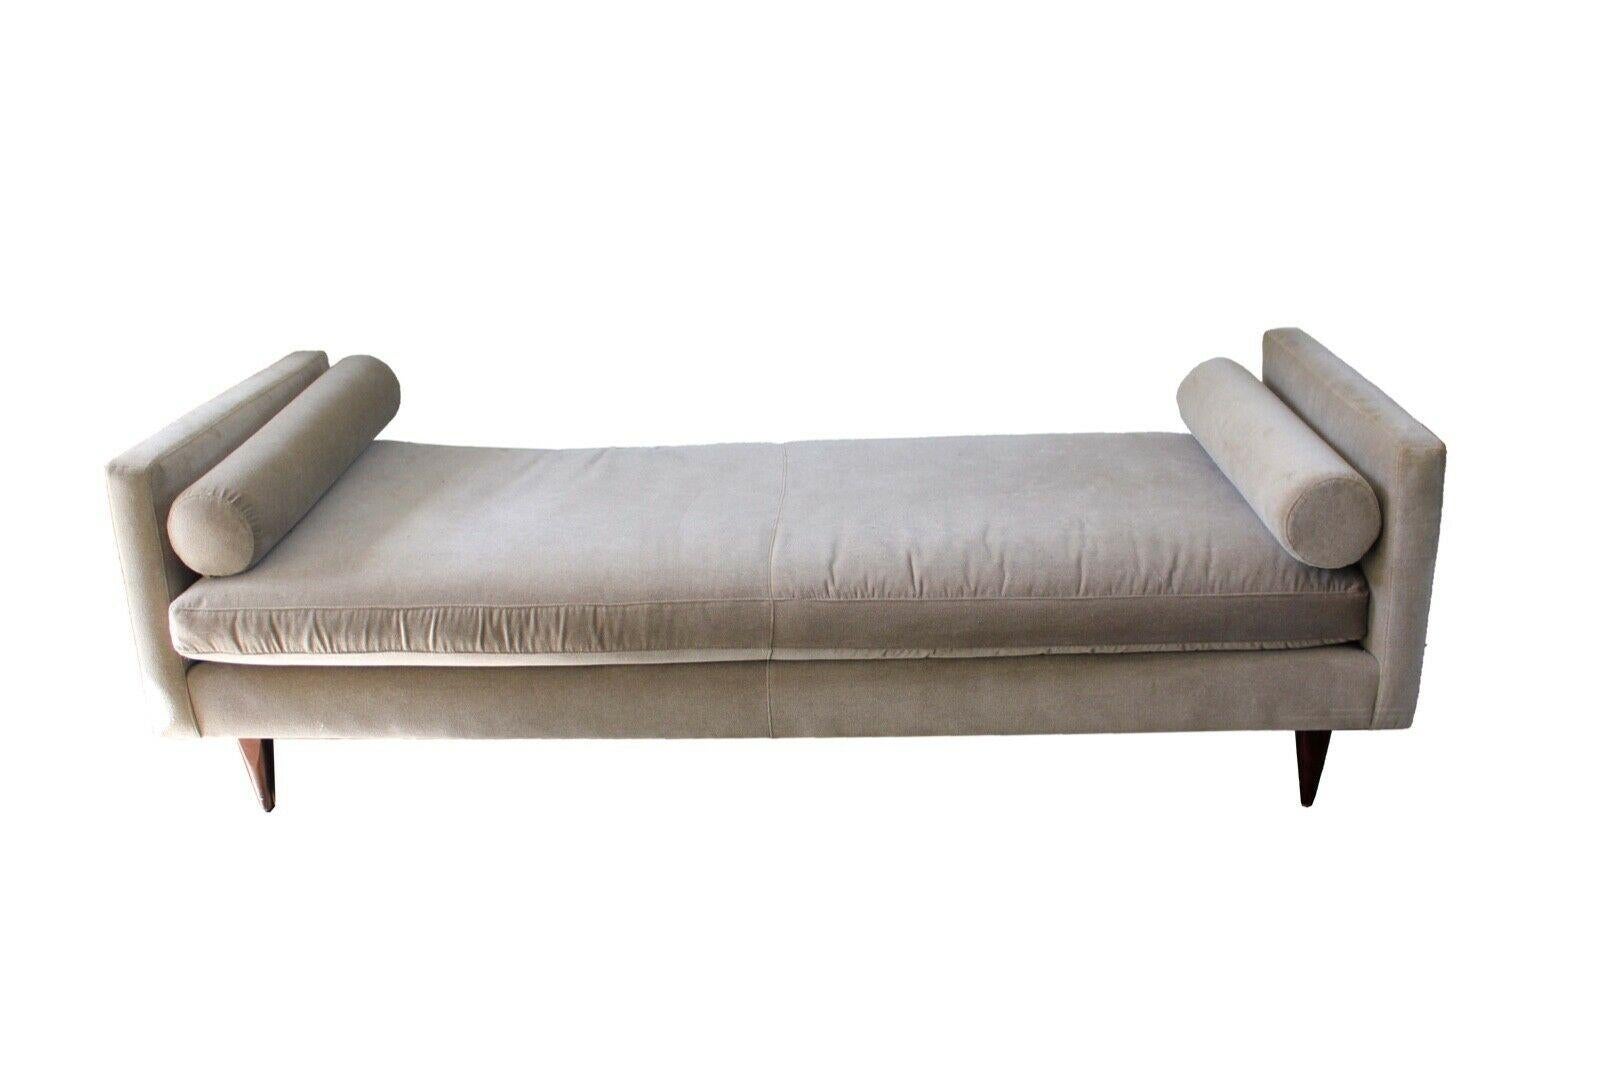 For your consideration is this long comfortable upholstered chaise by Baker with a pair of matching bolster pillows. Dimensions: 83 W x 35 D x 27 H.